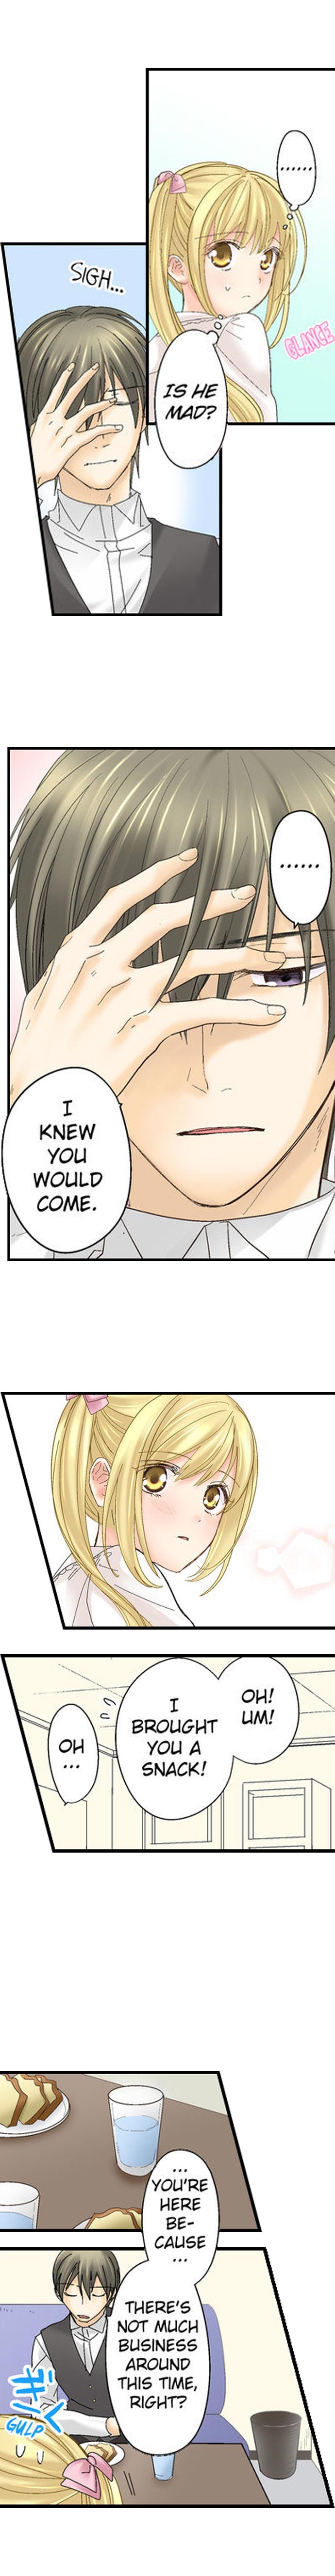 Running a Love Hotel with My Math Teacher - Chapter 17 Page 5